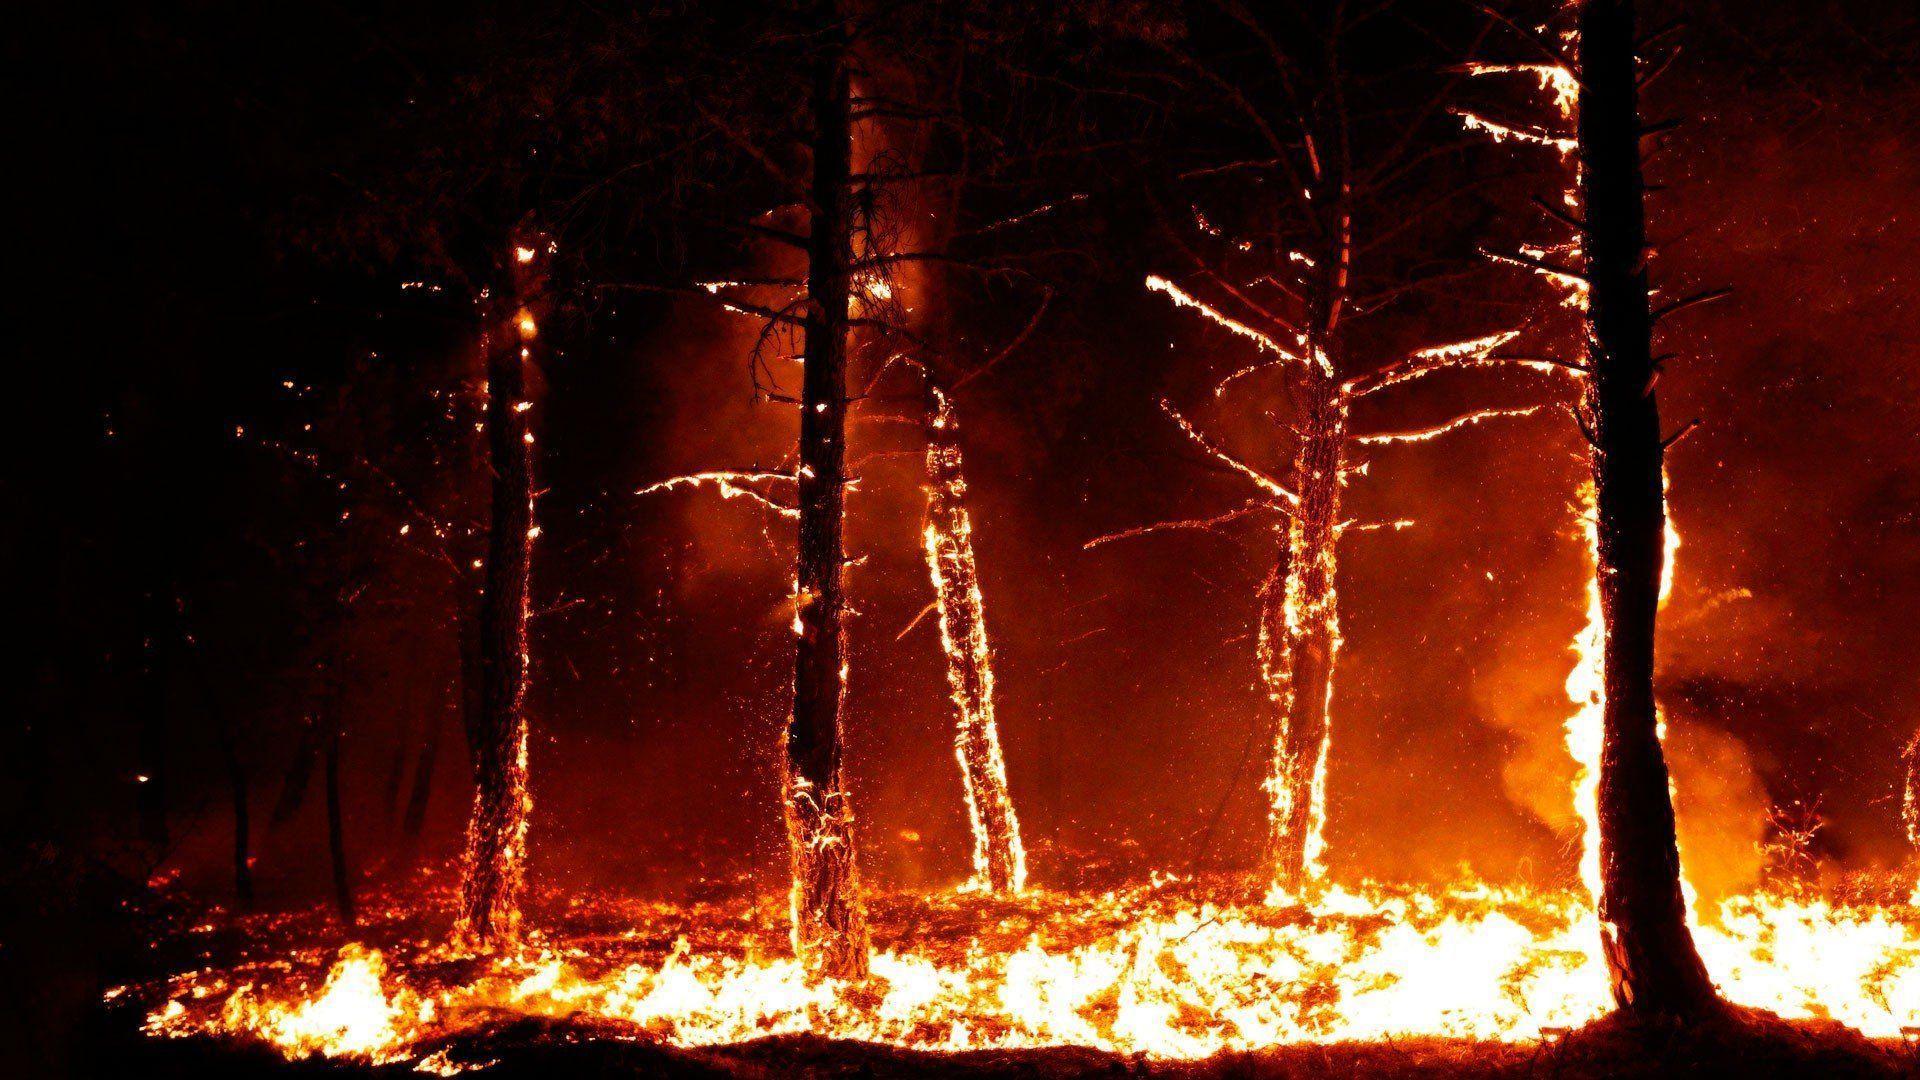 Forest fire flames tree disaster apocalyptic (22) wallpaper